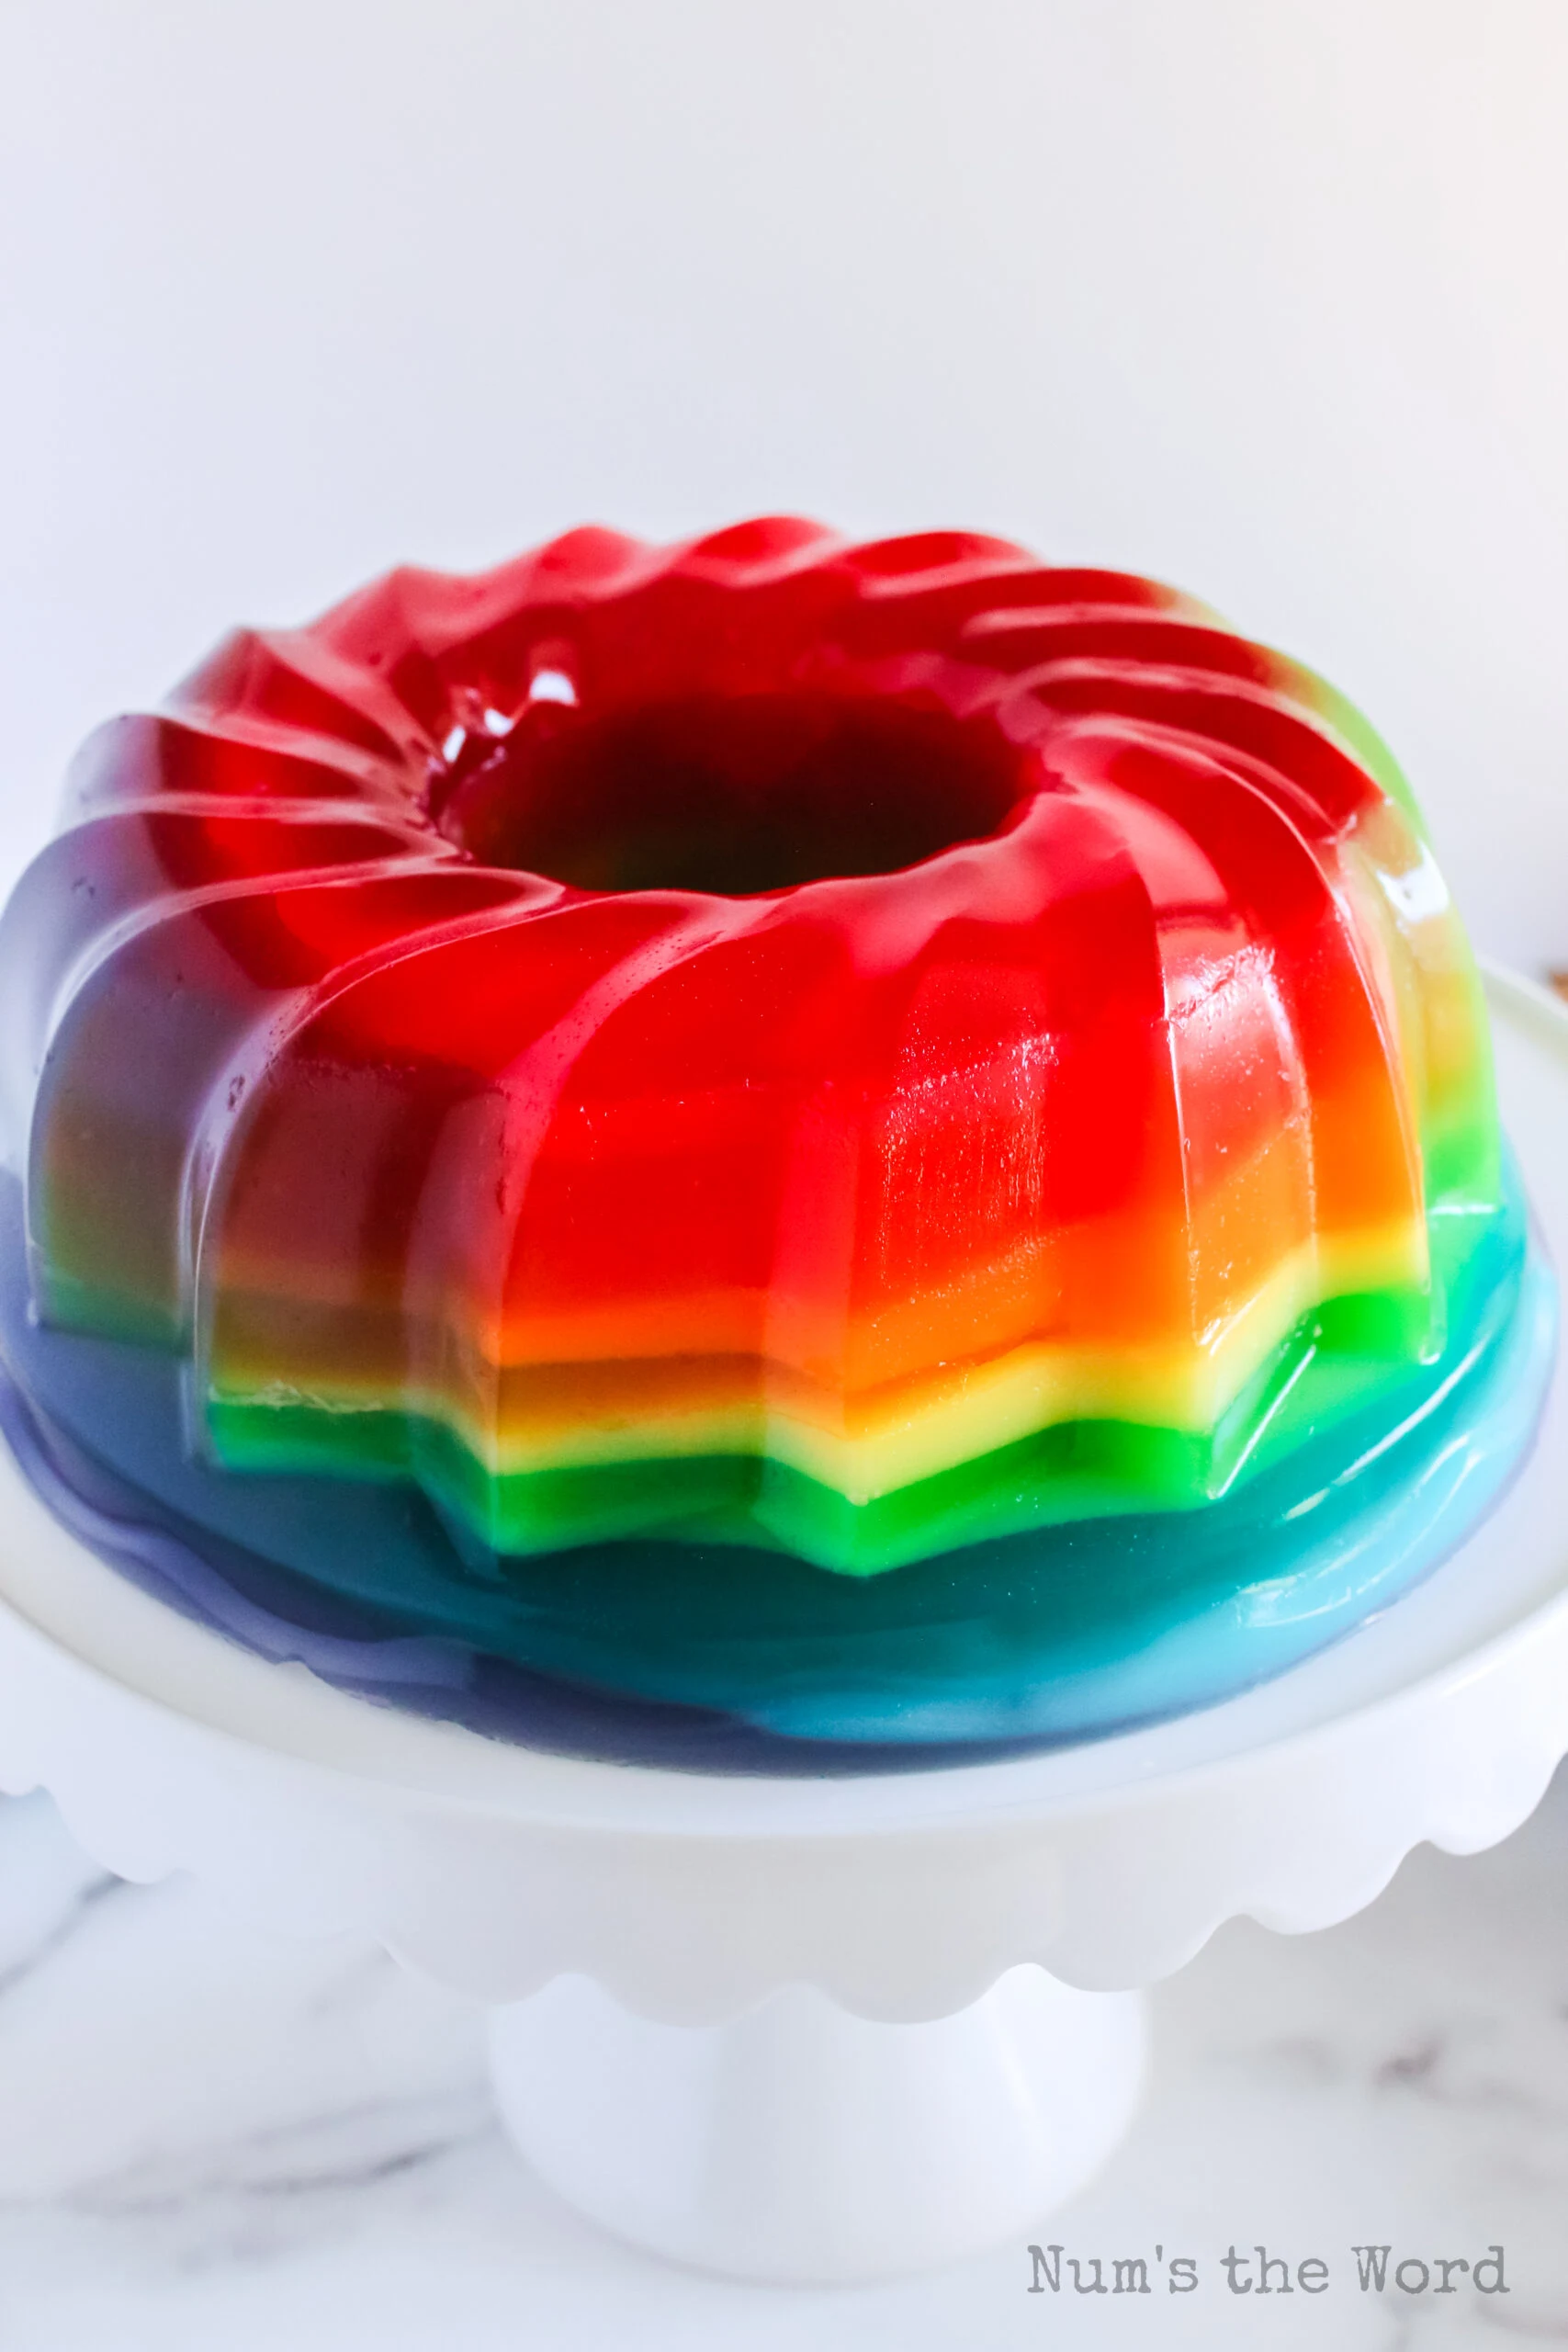 zoomed out image of jello fresh from the mold and on a platter, ready to be sliced and served